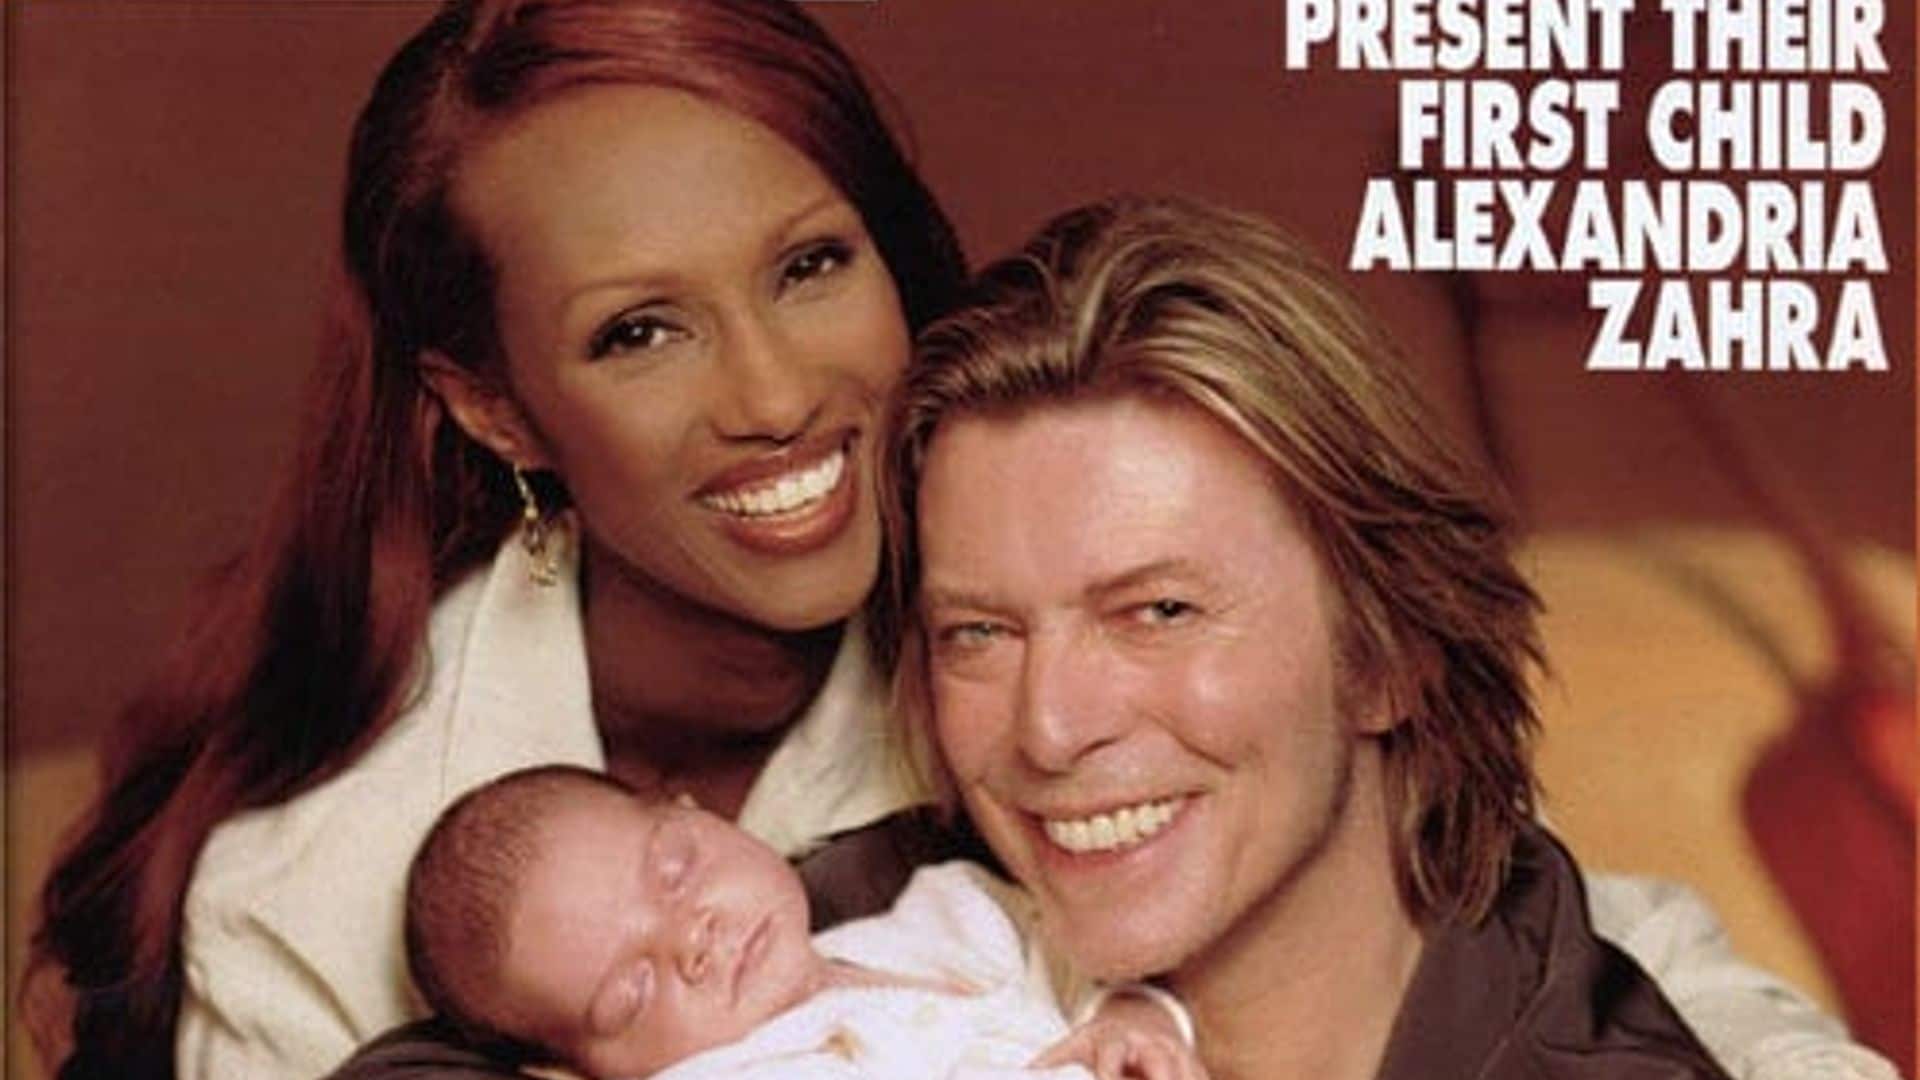 The HELLO! exclusive in which David Bowie and Iman introduced daughter Alexandria: Read in full